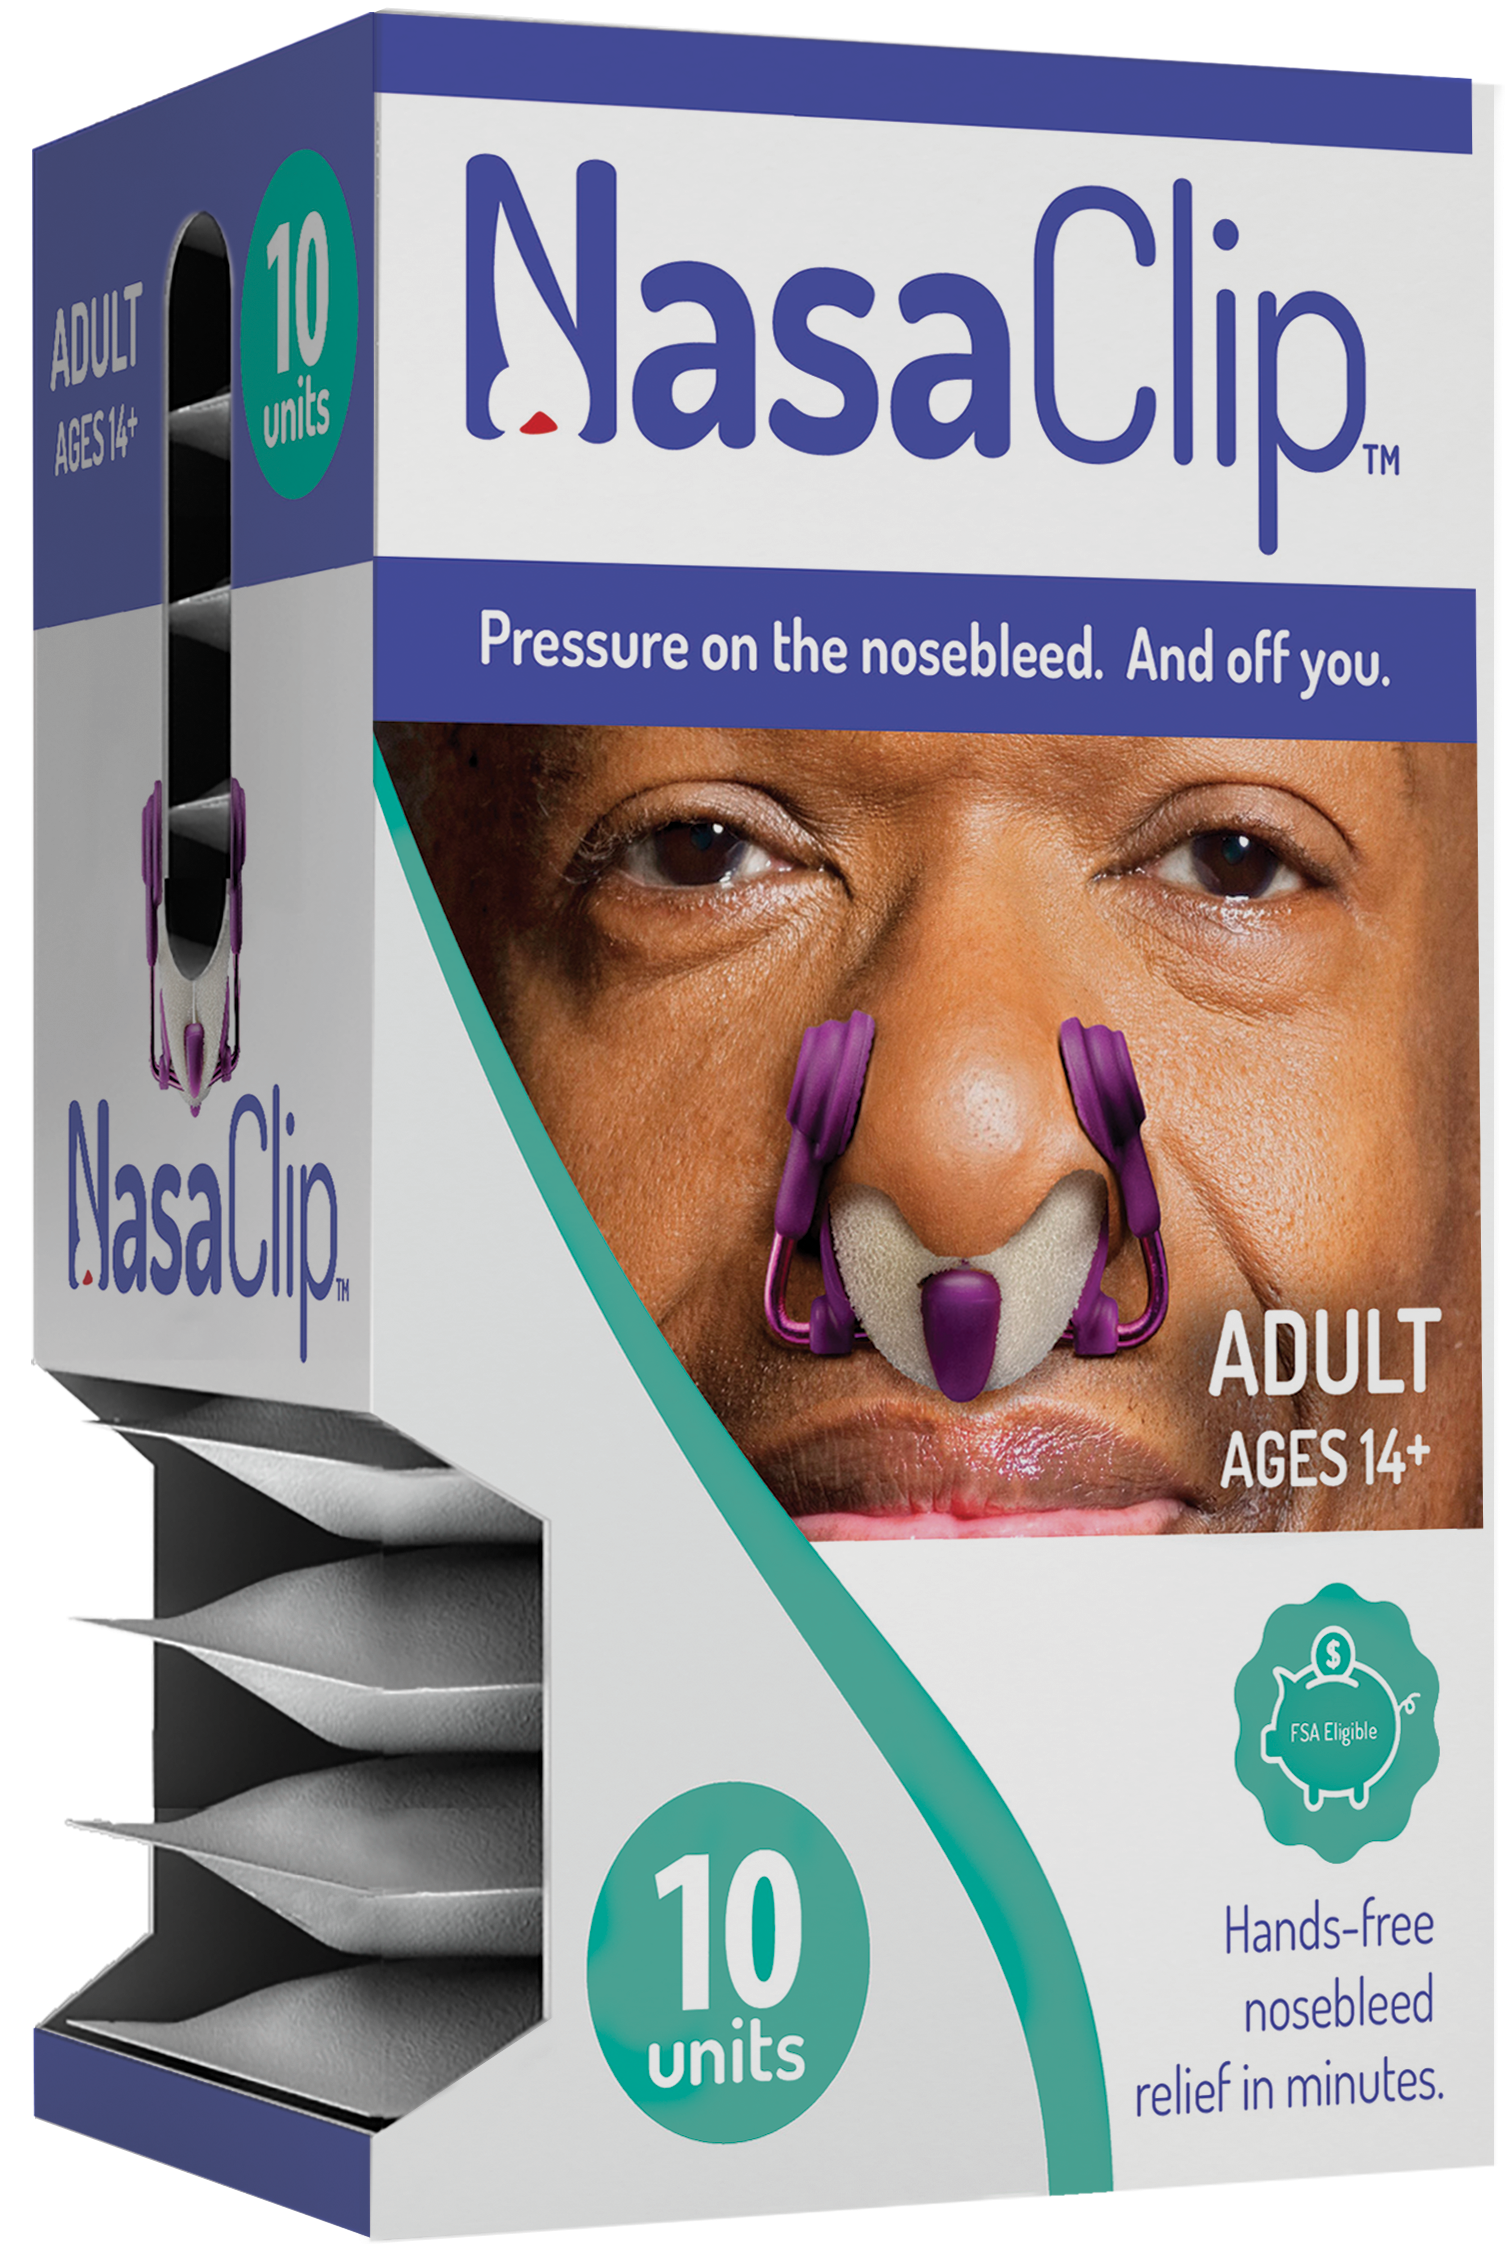 Package of 10 Units of NasaClips. An adult man with brown skin has a NasaClip clipped into his nose. FSA Eligable. NasaClip delivers hands-free nosebleed relief in minutes.